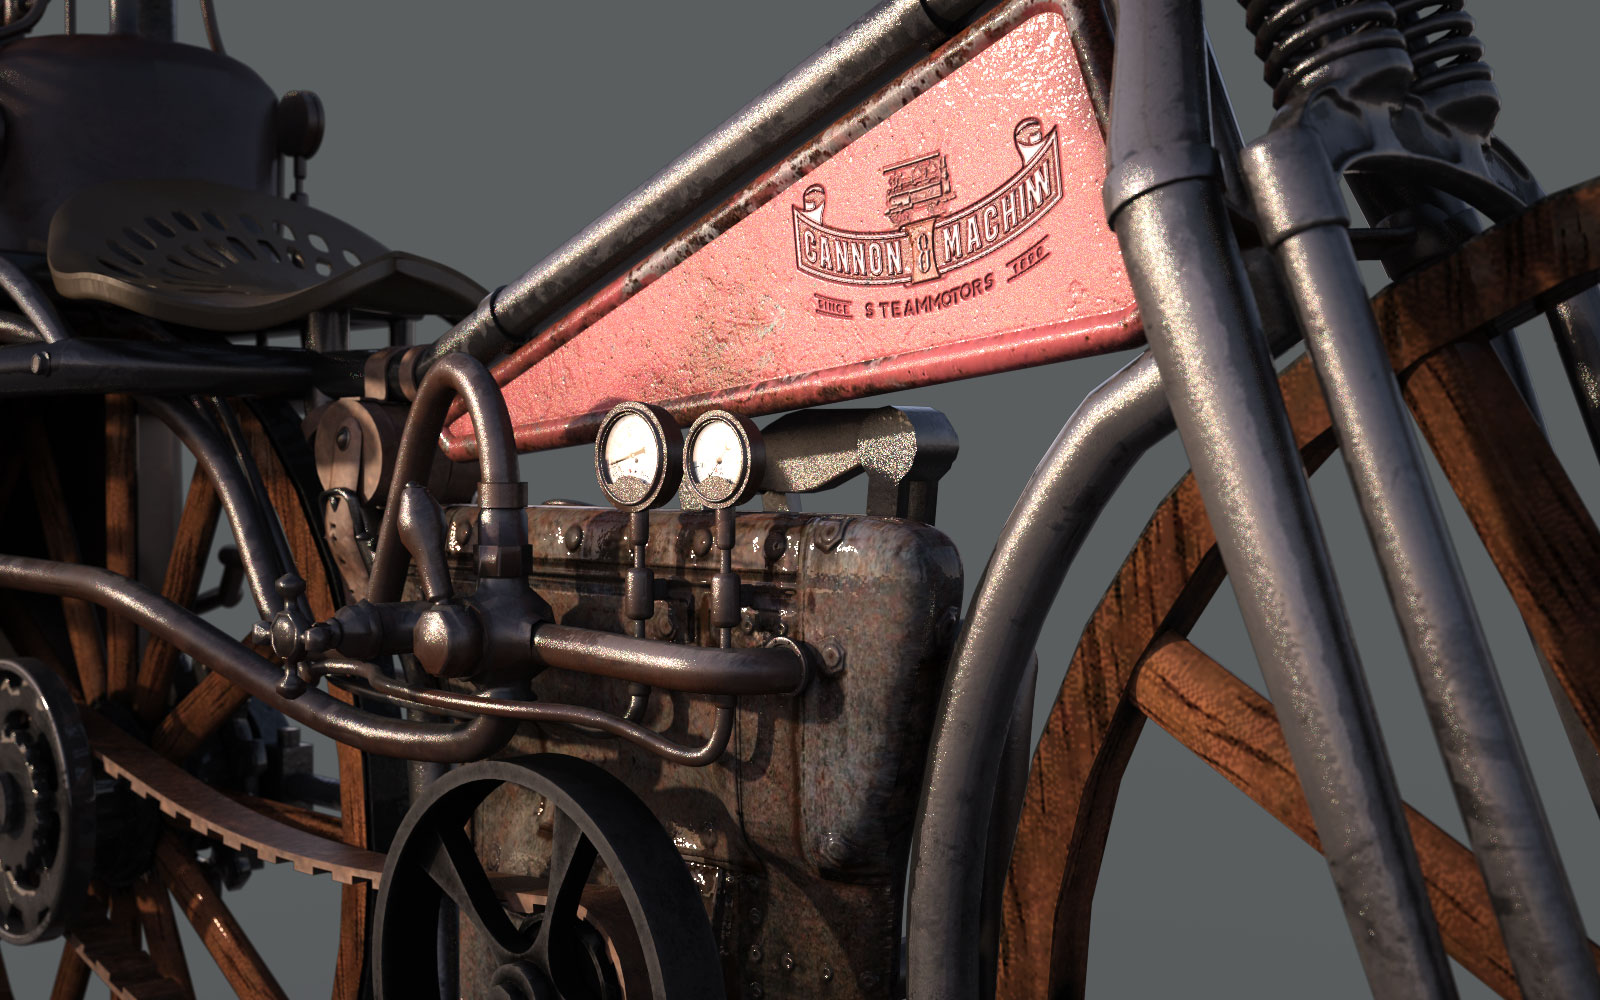 Steam Motorcycle by: Ansiko, 3D Models by Daz 3D